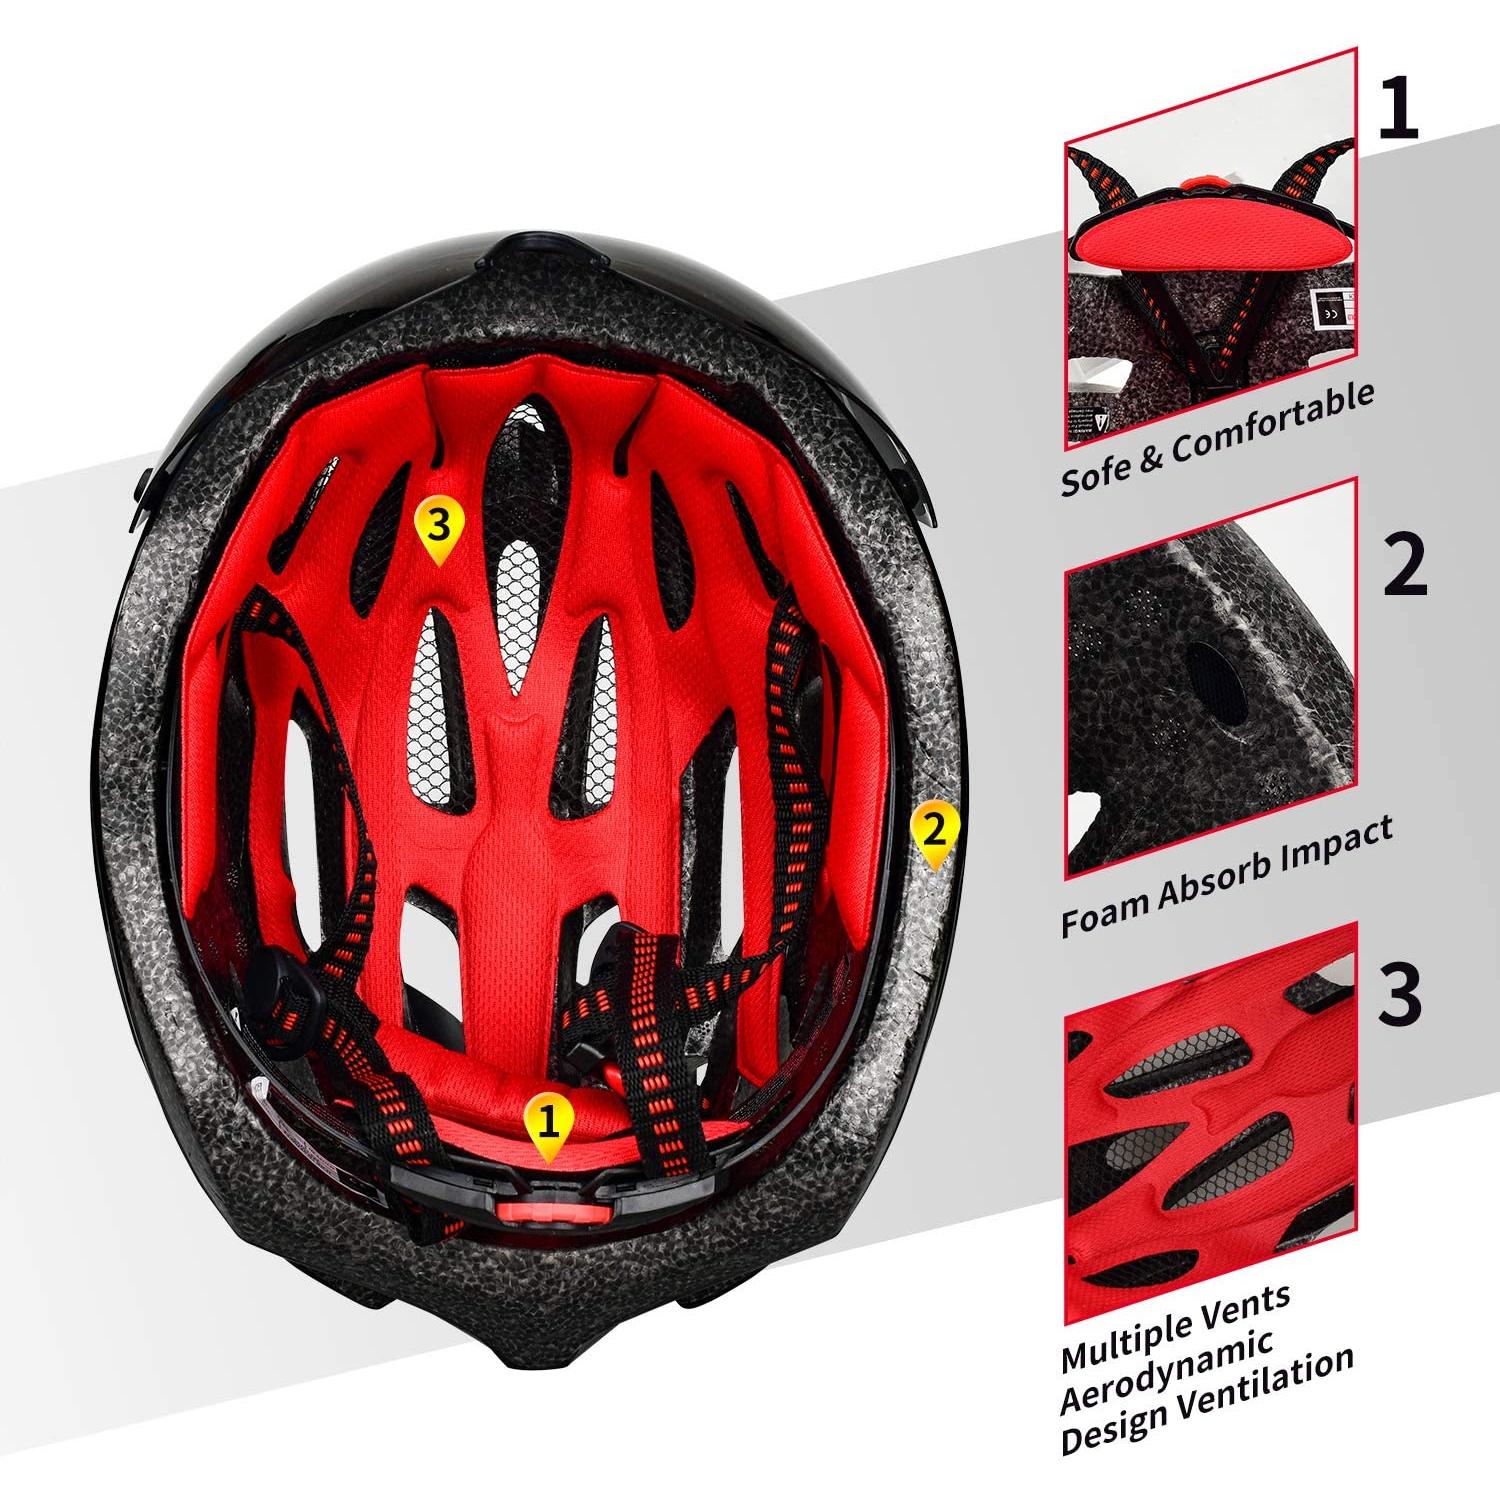 Bike Helmet with Detachable Magnetic Goggles & Face Shield